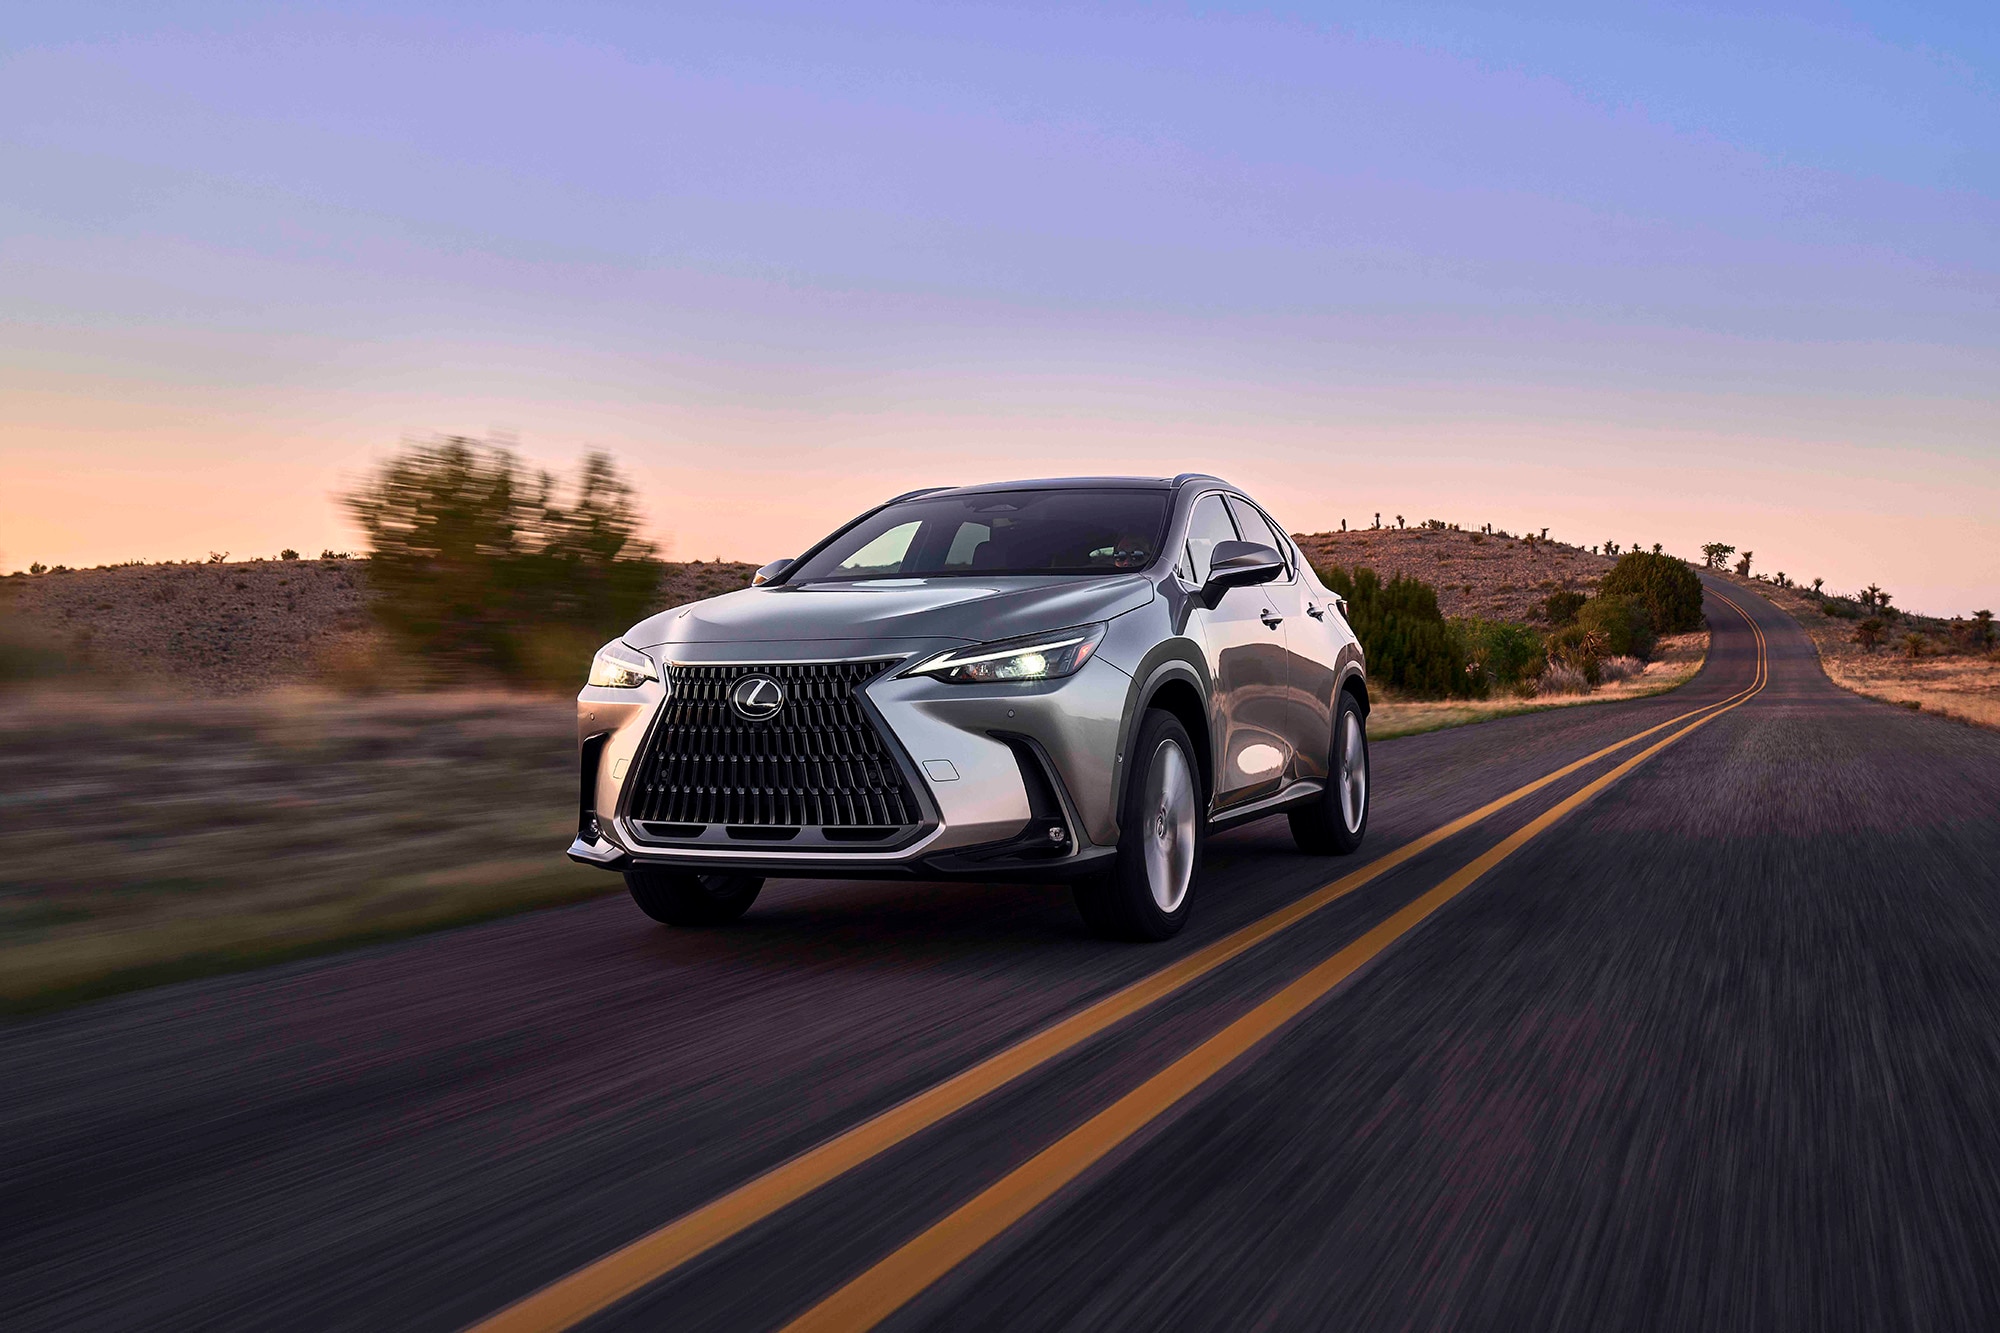 2023 Lexus NX 350h in sliver driving on a rural road